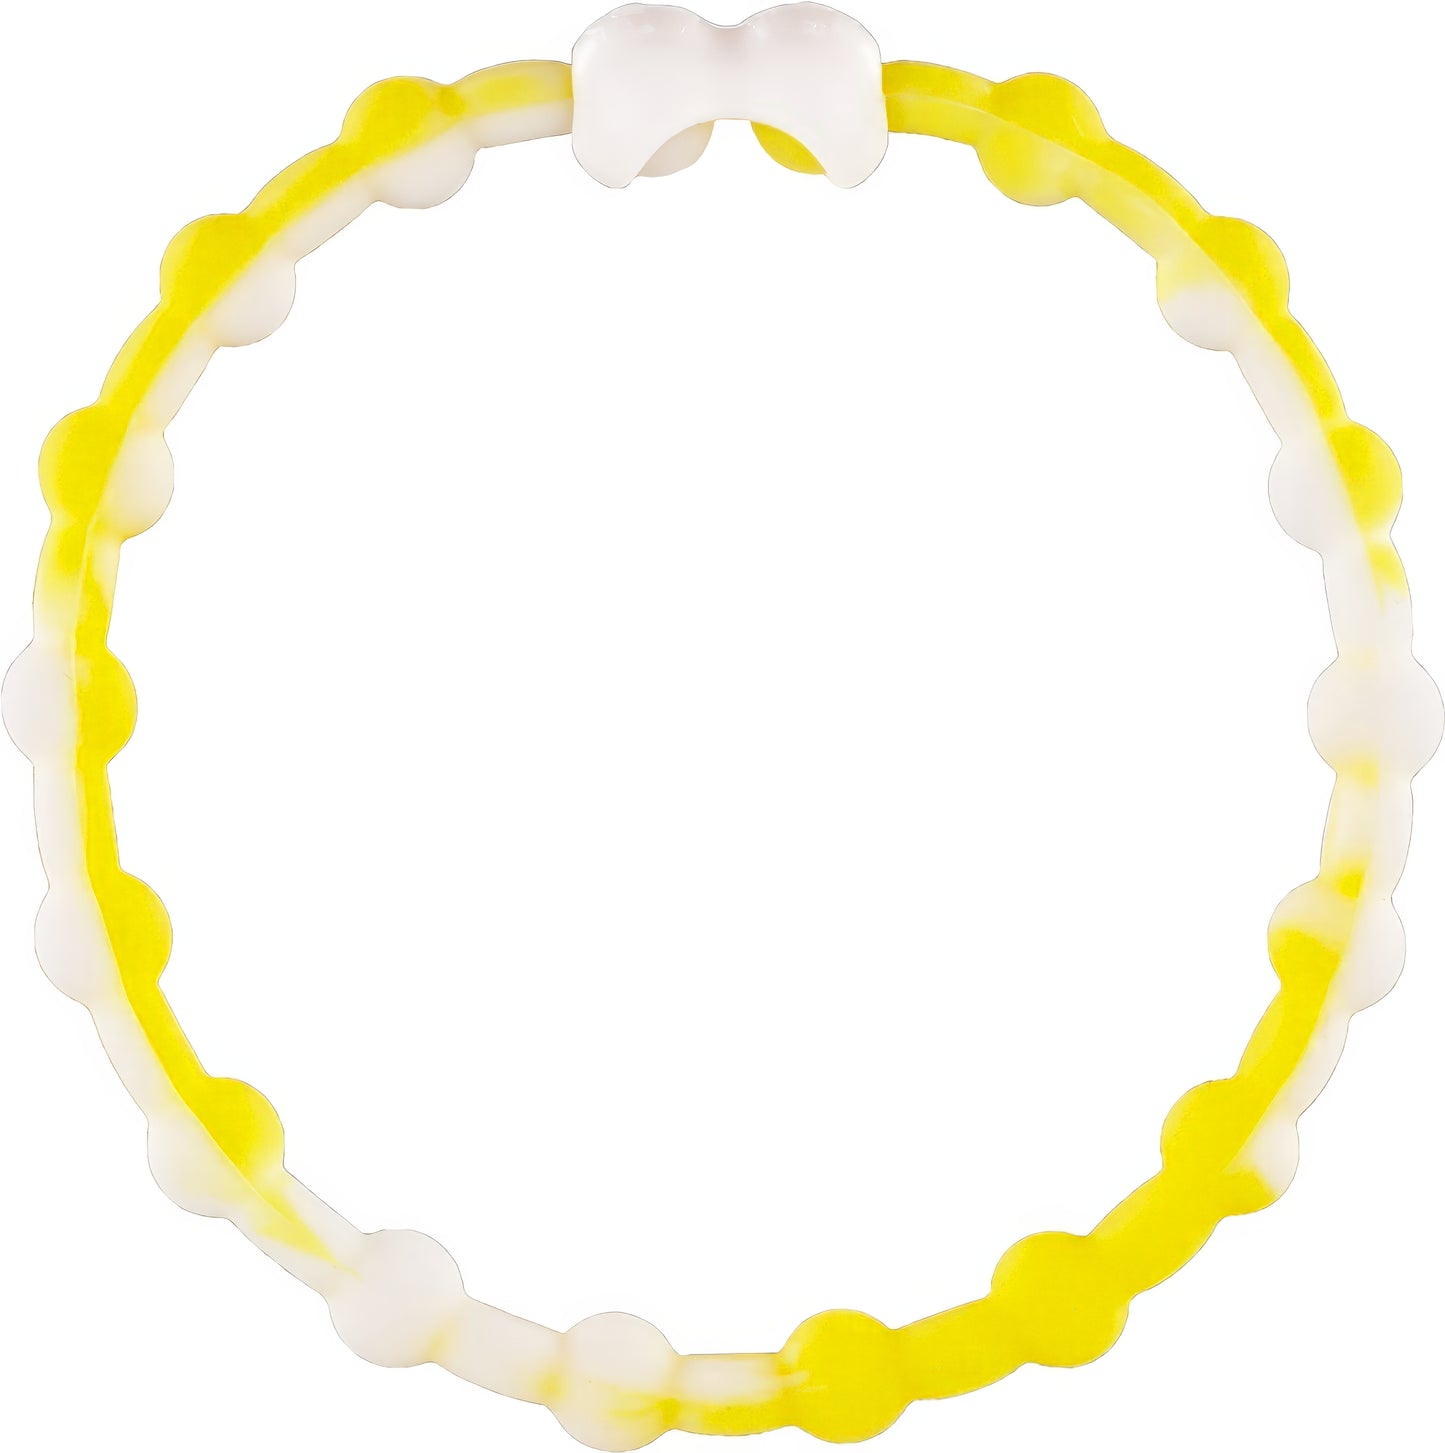 White & Yellow Hair Ties (4-Pack): Sunshine and Purity Unite for Endless Style Options